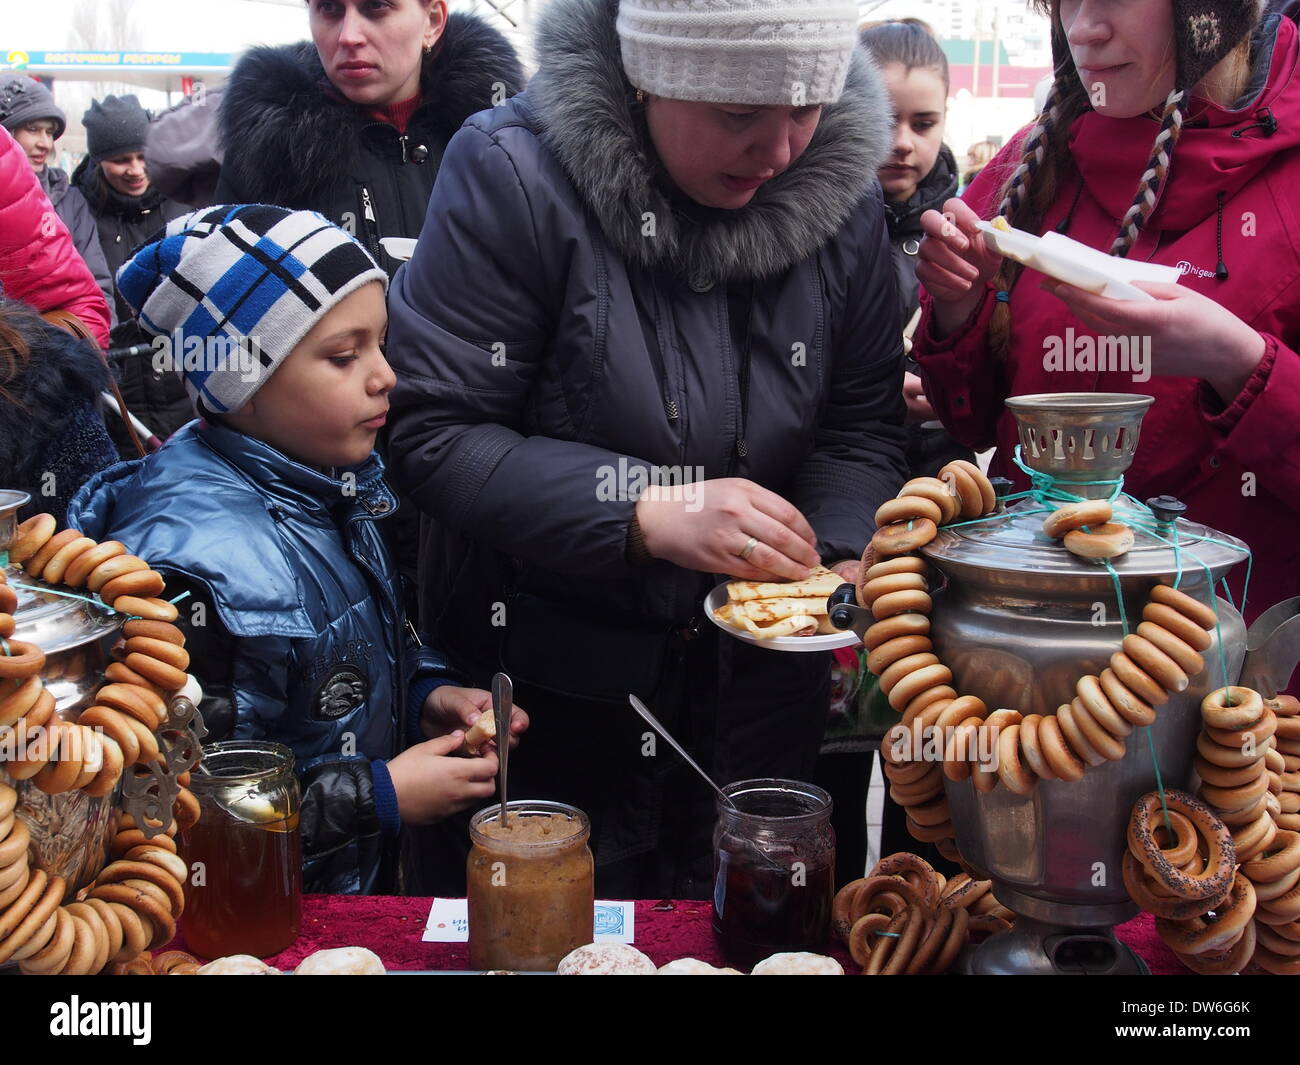 Lugansk, Ukraine. 1st March, 2014. Maslenitsa or Pancake Week is the only purely Slavic Holiday that dates back to the pagan times. This is the celebration of the imminent end of the winter which the Orthodox Church has accommodated as a week of feasting before Great Lent. Credit:  Igor Golovnov/Alamy Live News Stock Photo